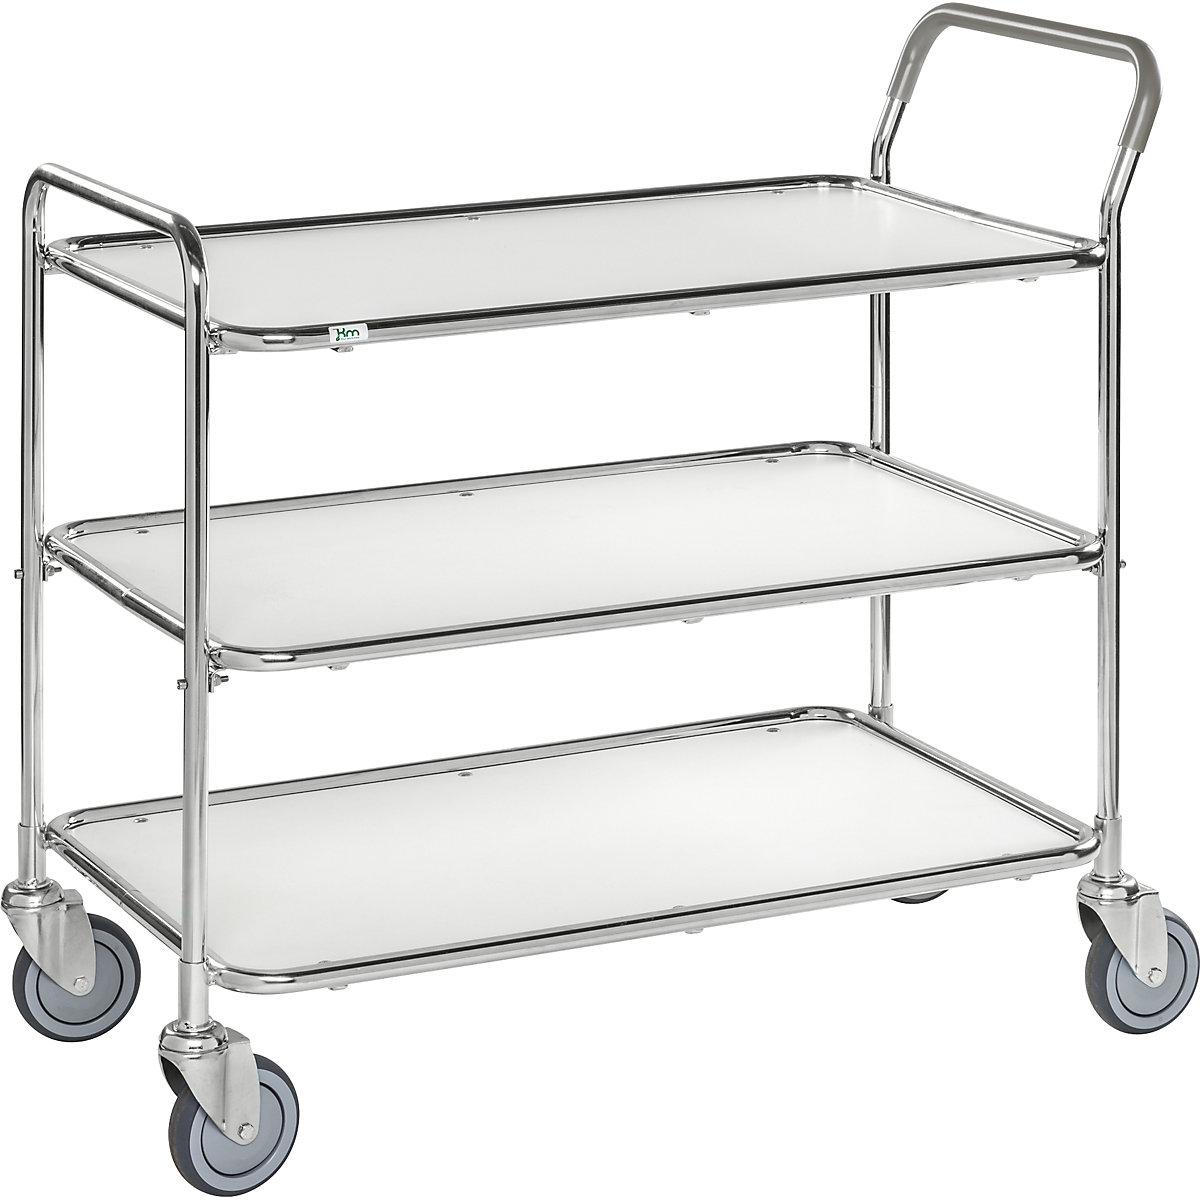 Table trolley – Kongamek, 3 shelves, LxWxH 1020 x 555 x 965 mm, zinc plated / white, 2+ items-5